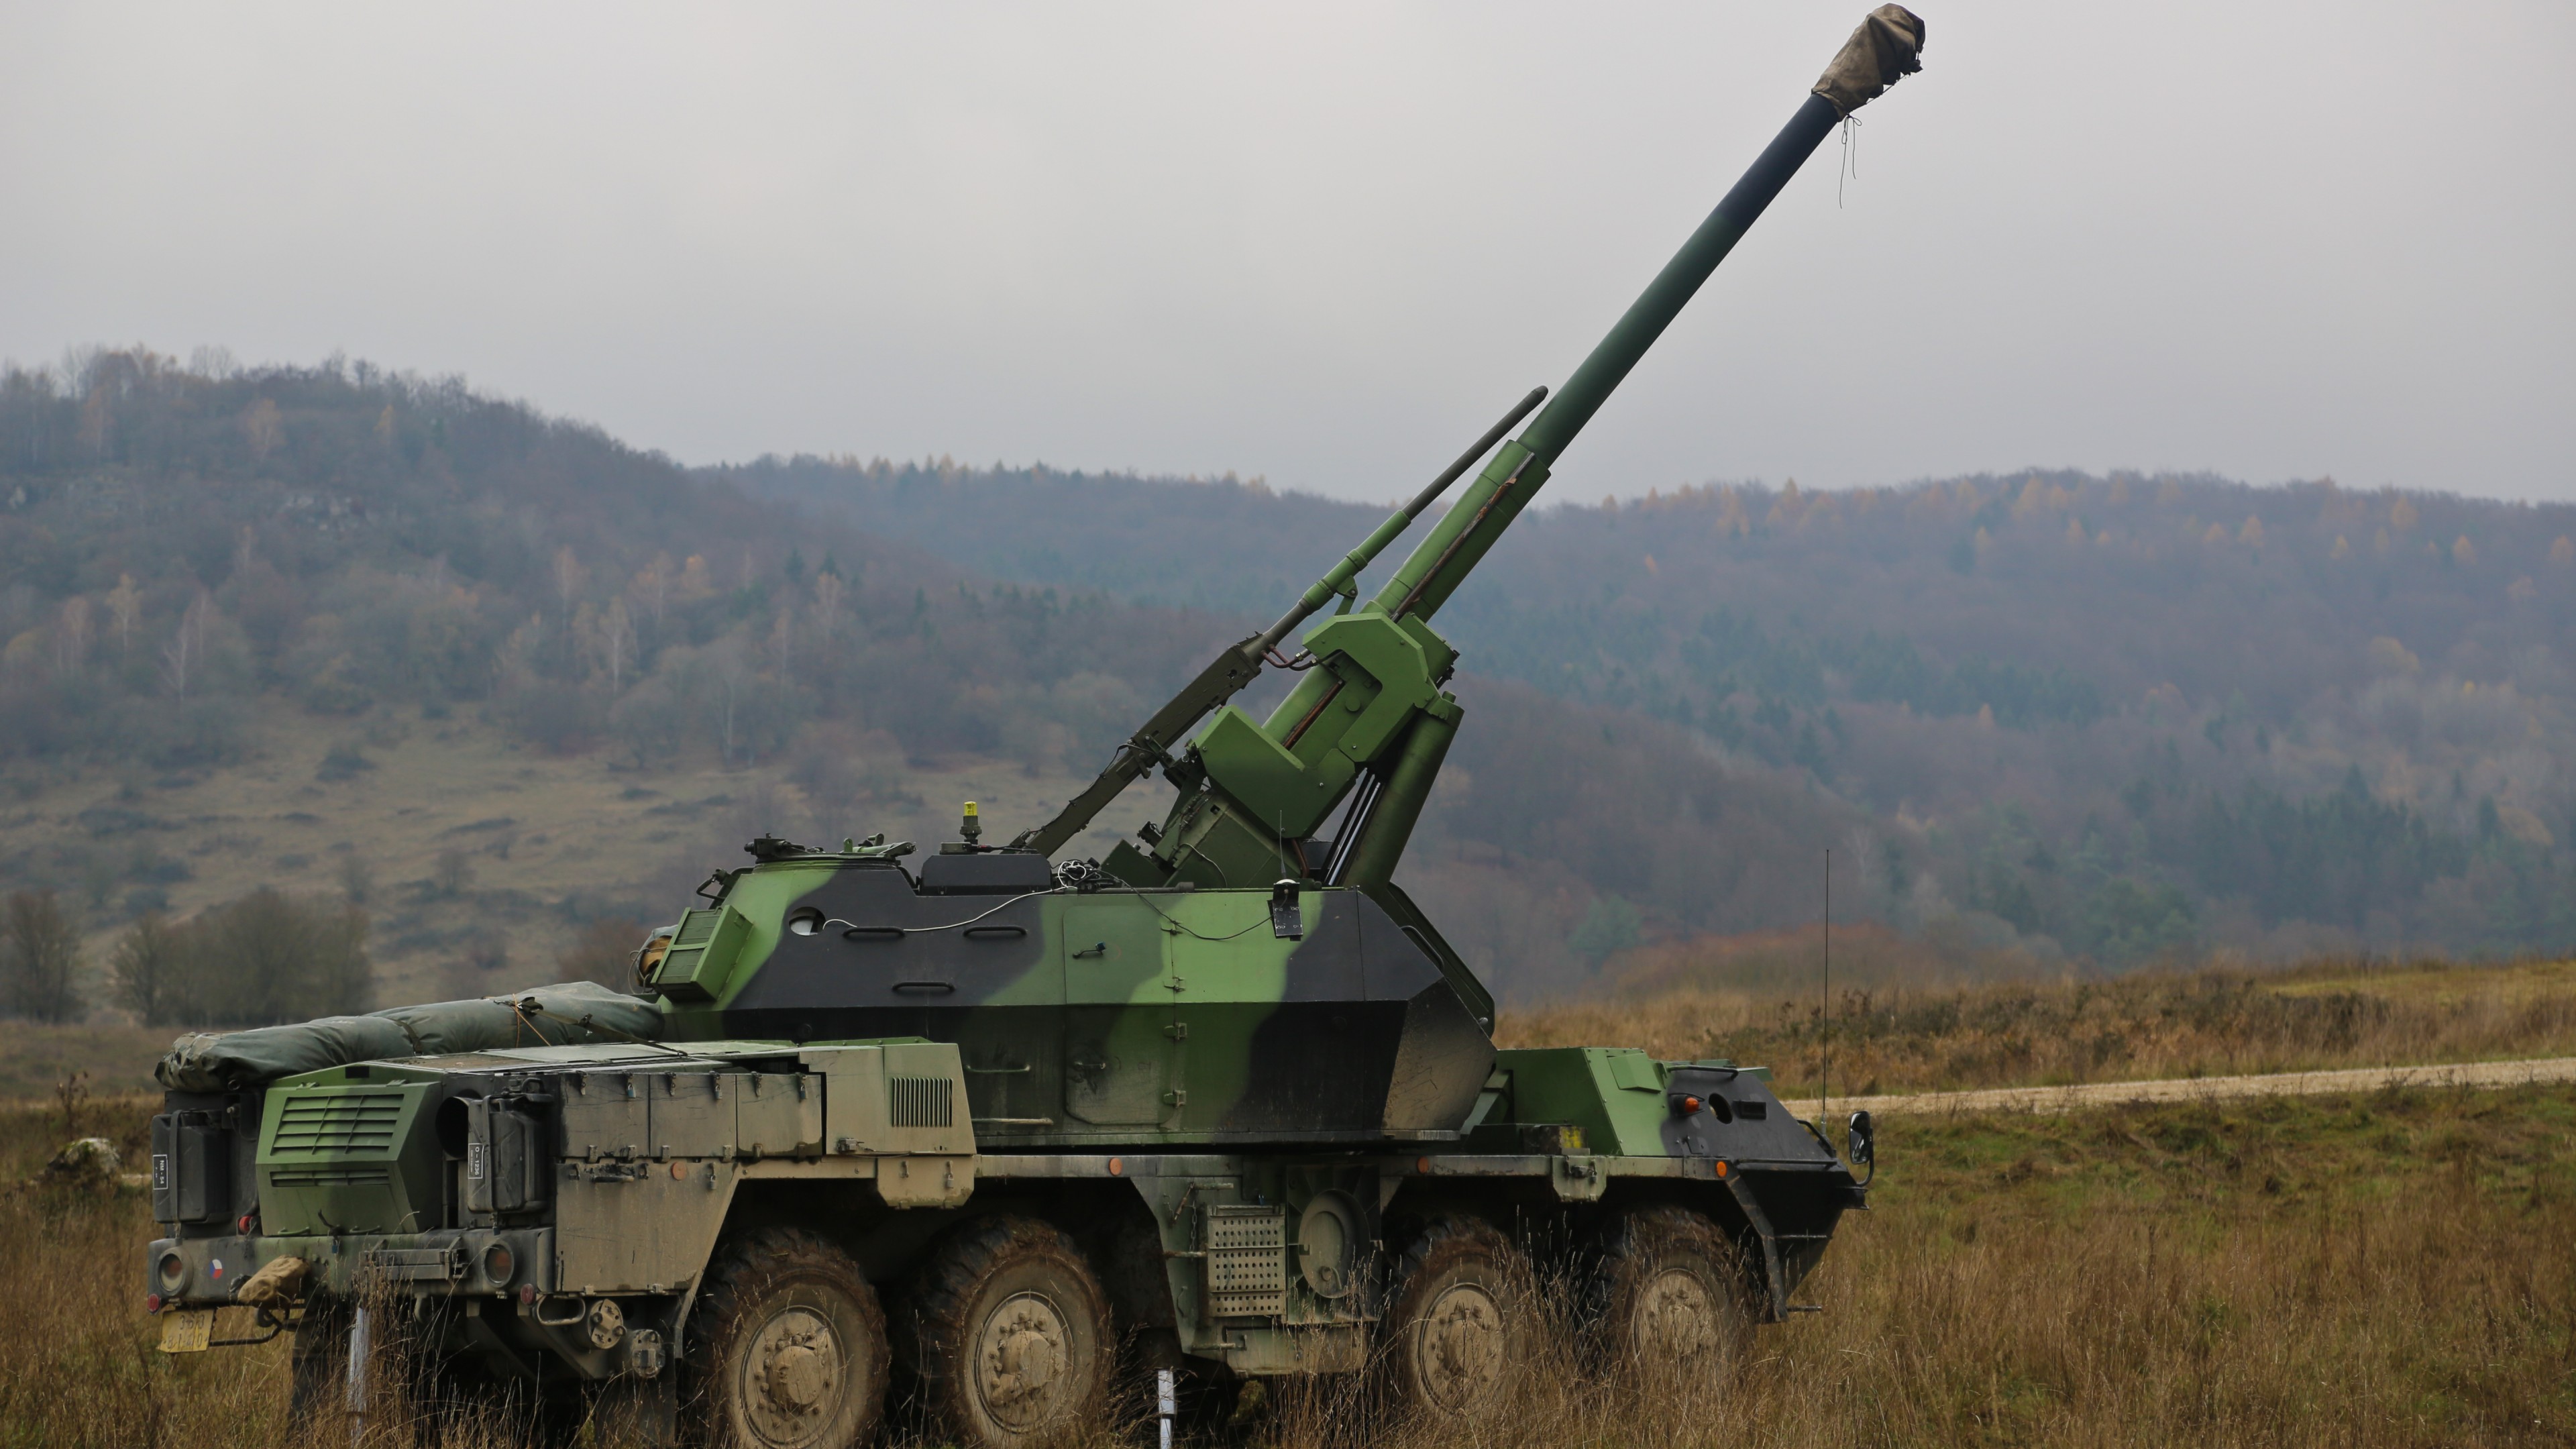 APU is sent to the advanced Dana self-propelled guns received from a NATO member state (video)